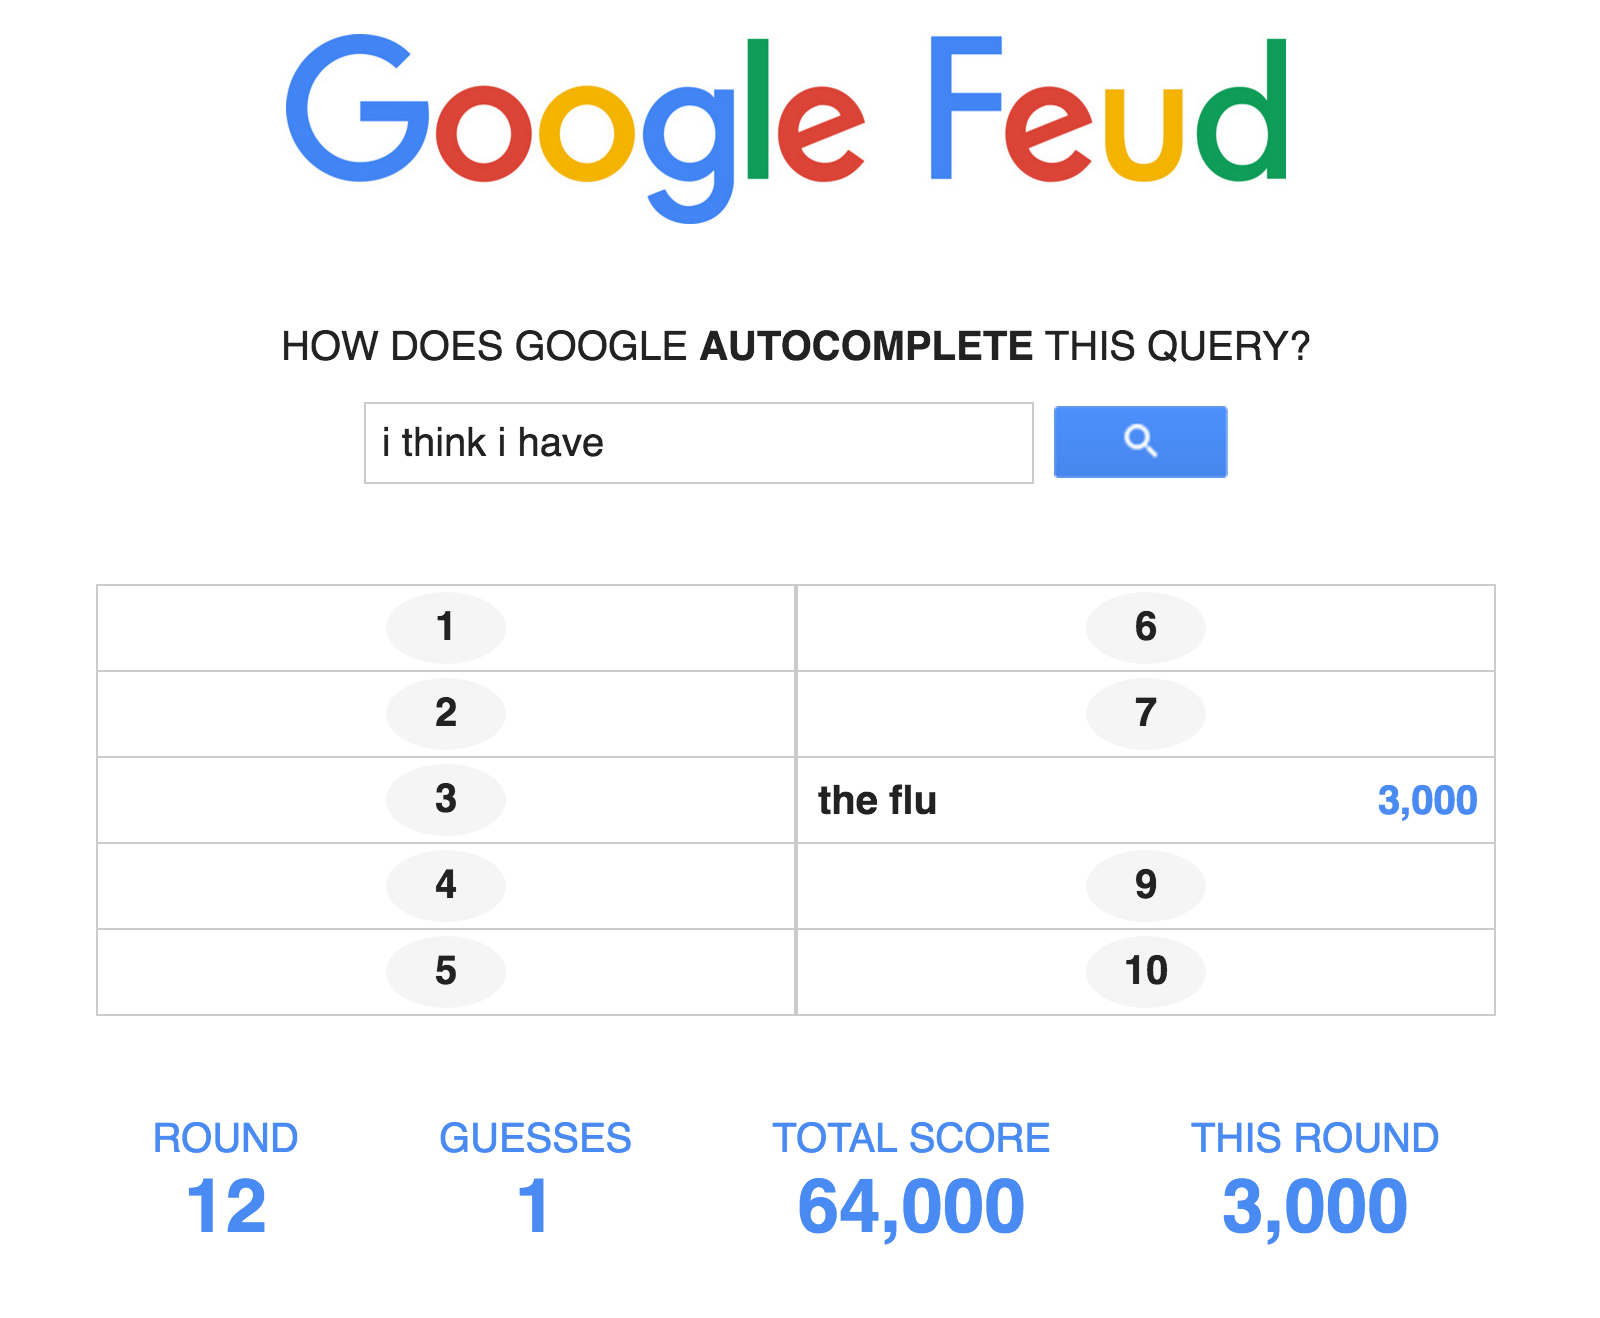 Google Feud is Family Feud with Google Autocomplete